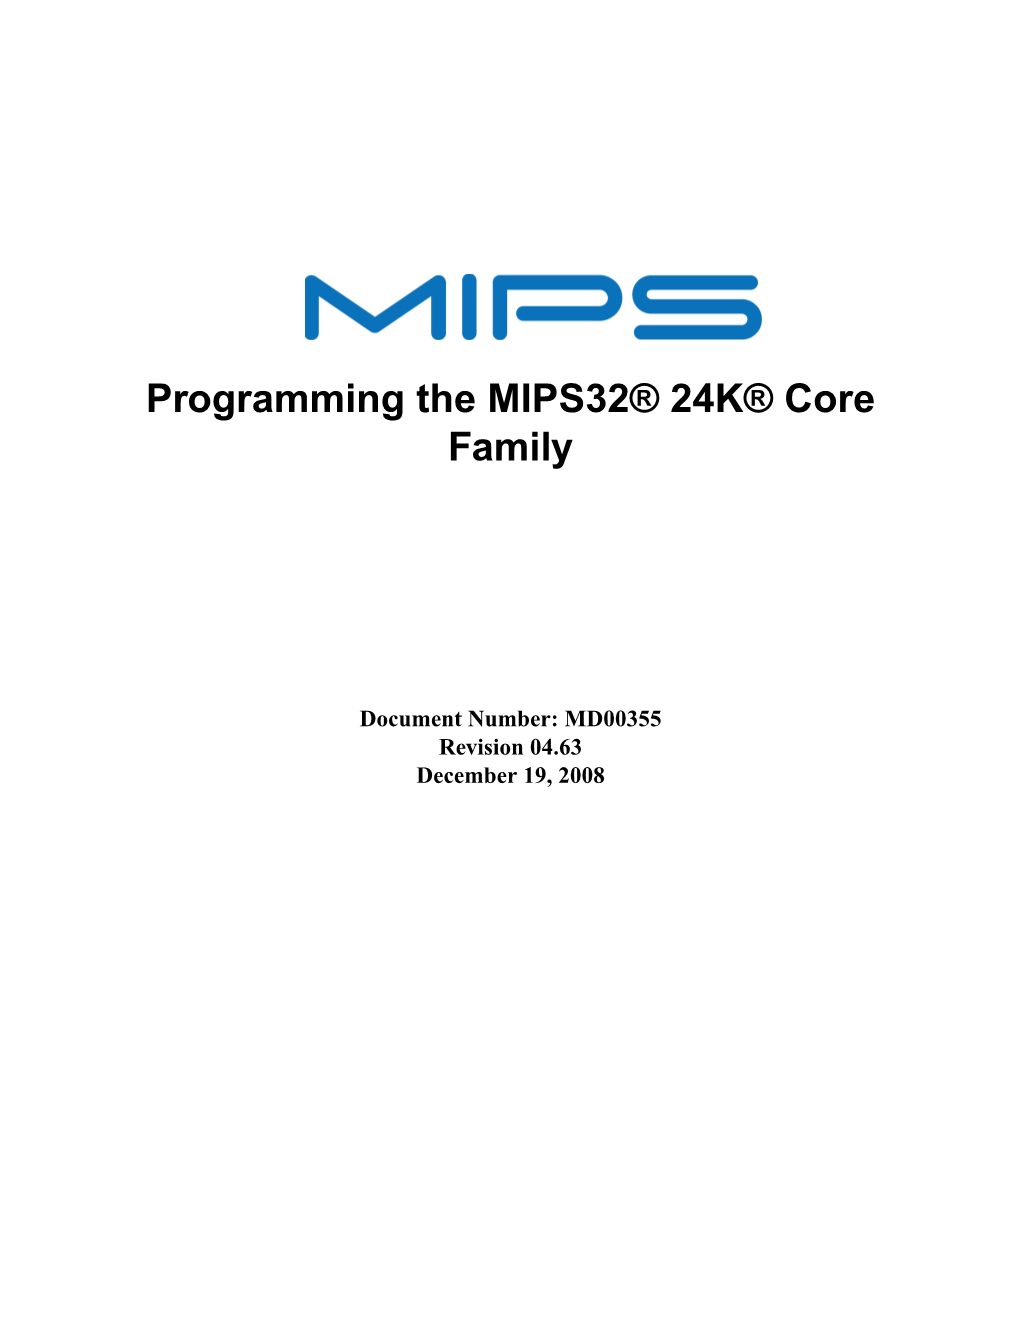 Programming the MIPS32® 24K® Core Family, Revision 04.63